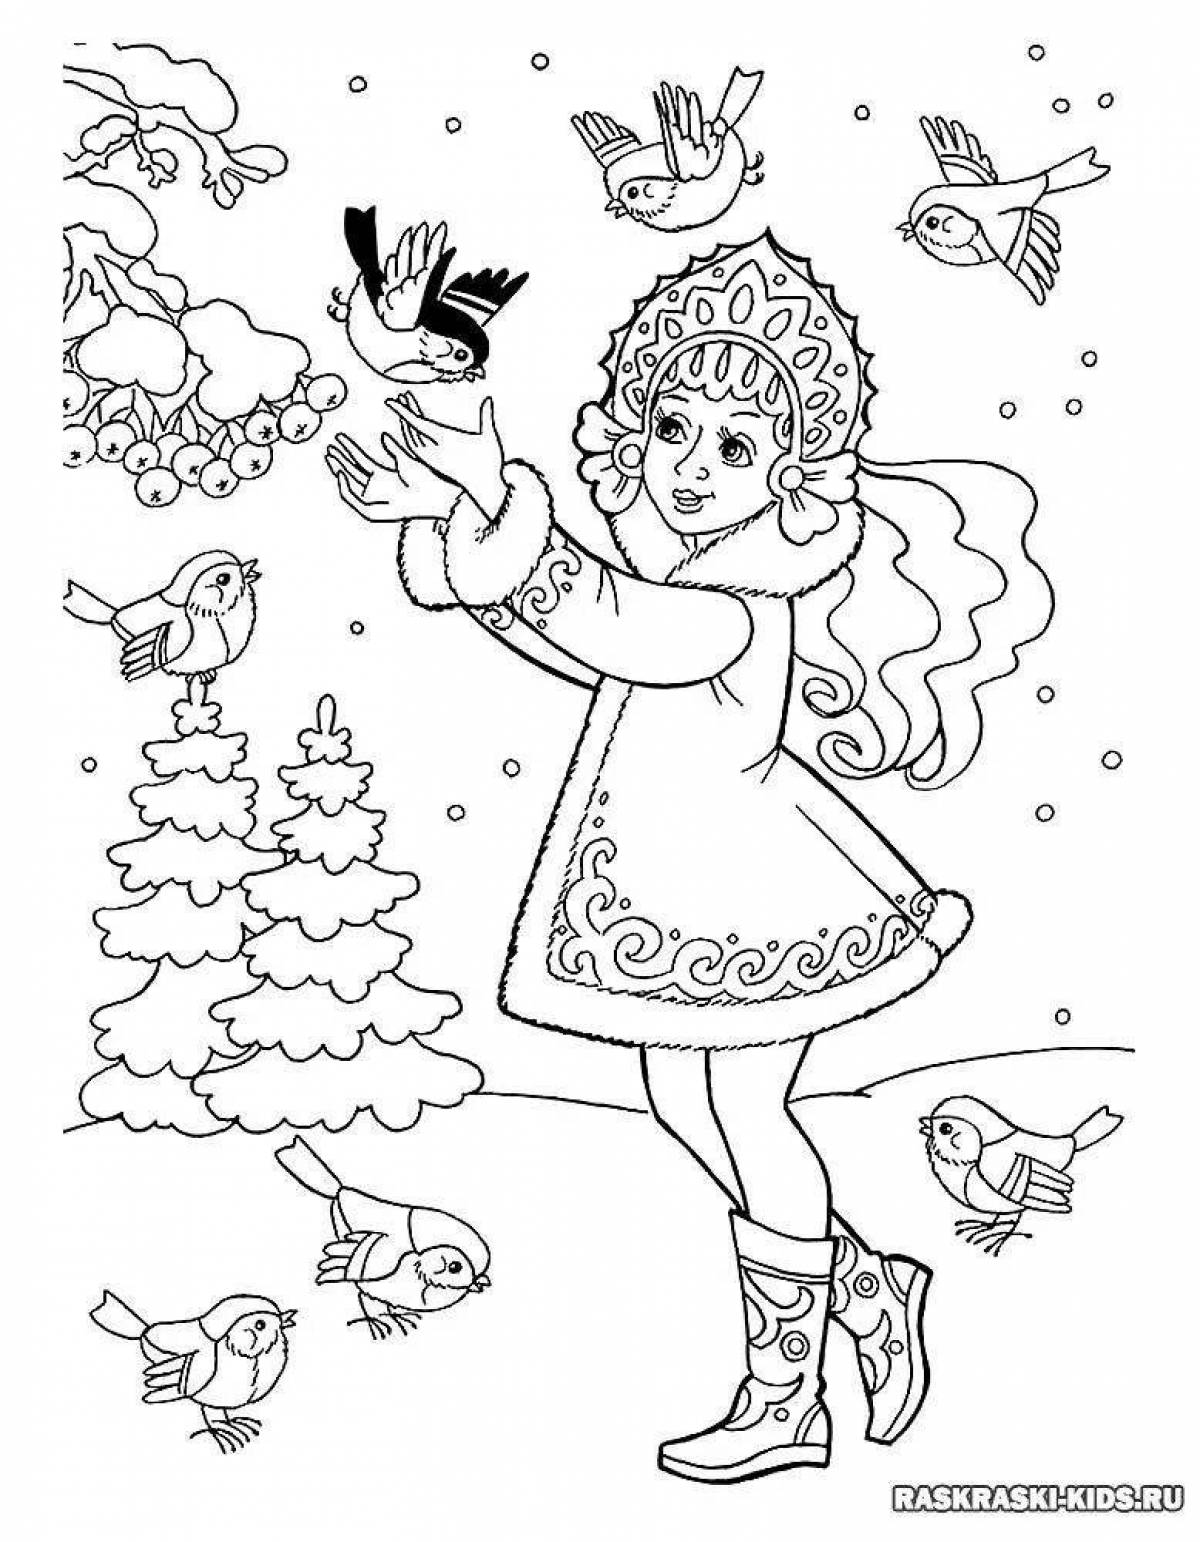 Brilliant coloring winter for children 8 years old